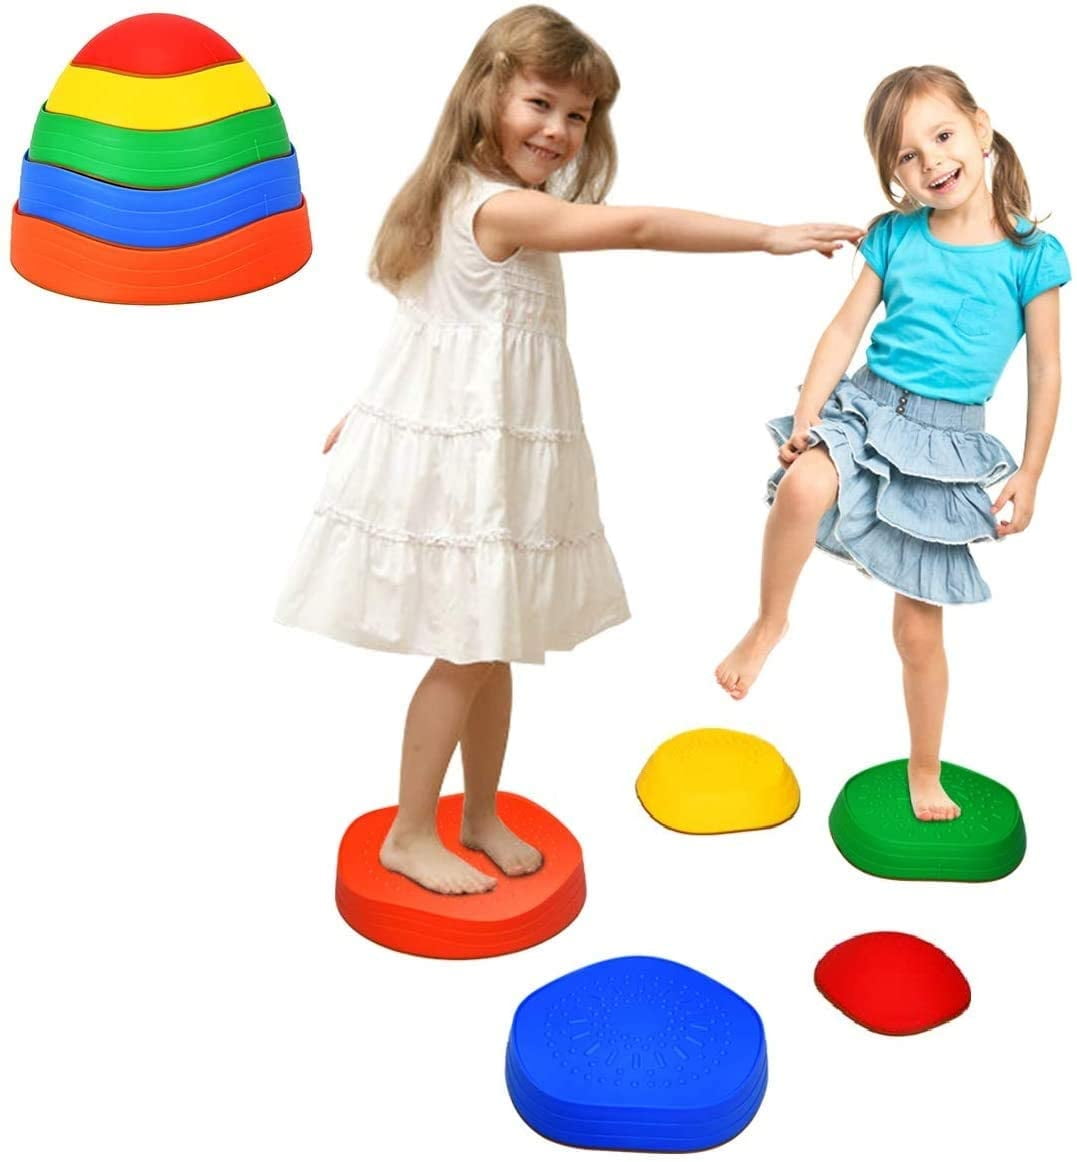 Kids Balance Stepping Stones,5 Wave Balance Blocks,Rainbow Crossing River Stone Toy Promote Coordination,Early Educational Toys for Boys Girls